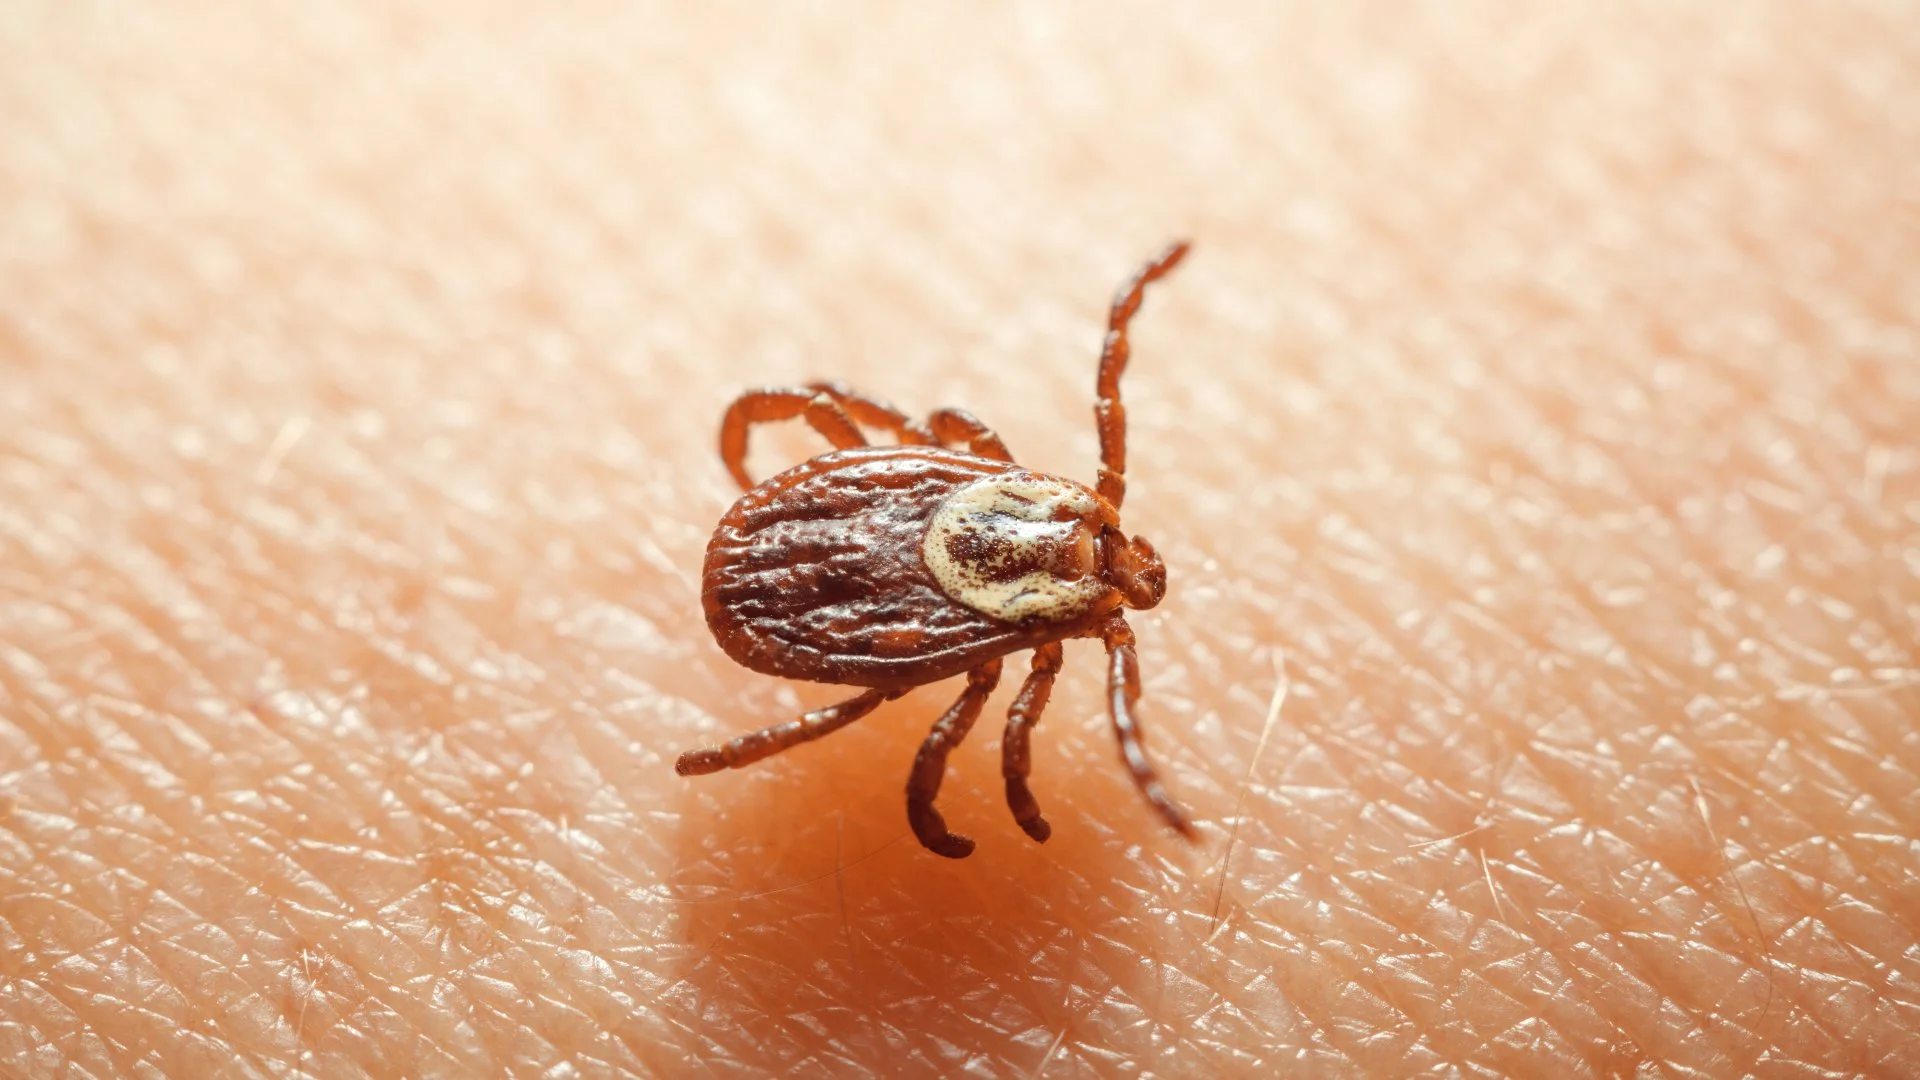 Are There Ways to Repel Ticks From Your Property?